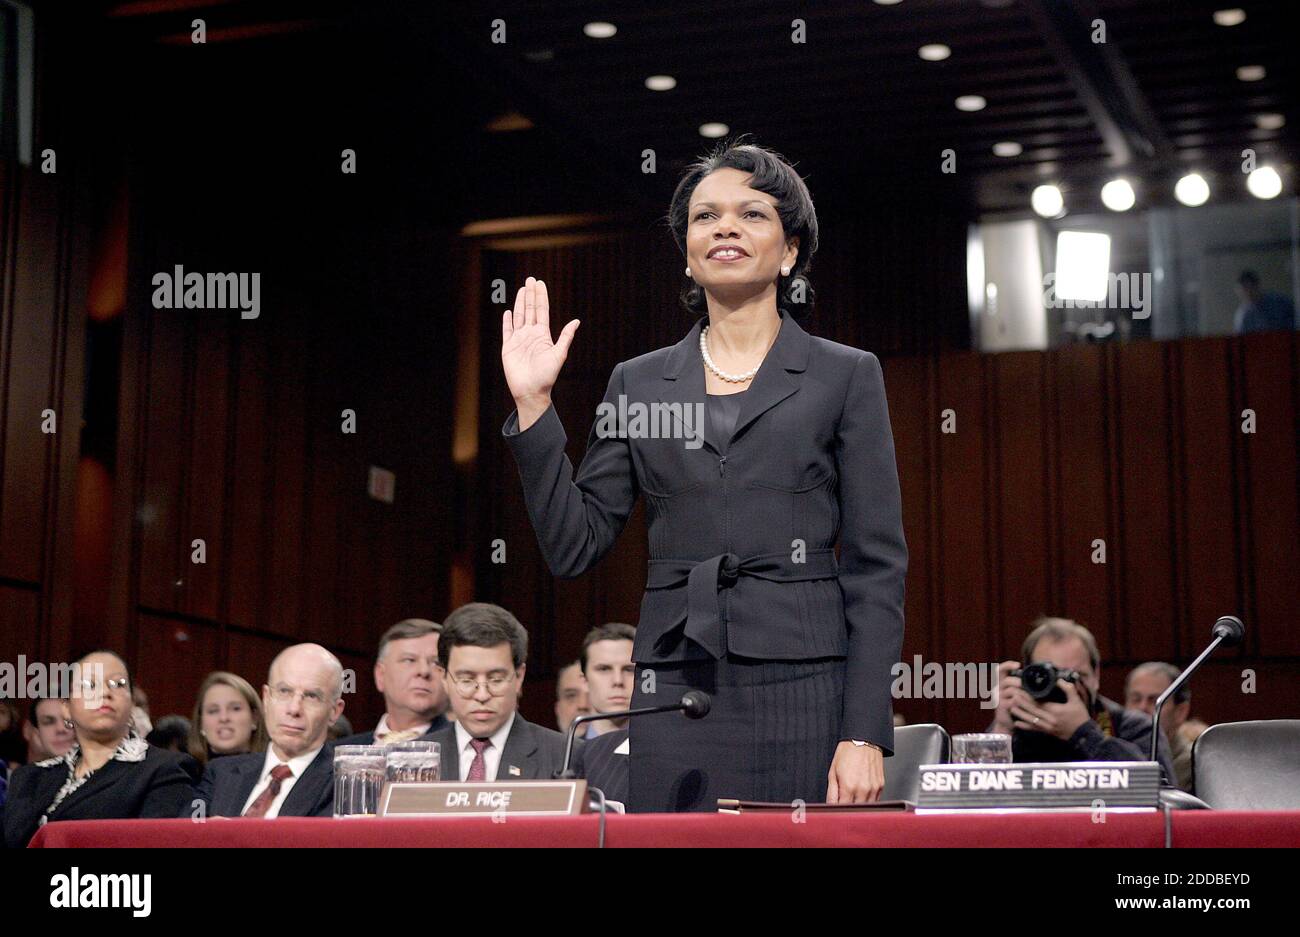 NO FILM, NO VIDEO, NO TV, NO DOCUMENTARY - Condoleezza Rice is sworn in before the Senate Foreign Relations Committee before her confirmation hearing at the Capitol in Washington DC, USA, on Tuesday, January 18, 2005, on her nomination by President George W. Bush to succeed Colin Powell as the Secretary of State. Photo by Chuck Kennedy/KRT/ABACA. Stock Photo